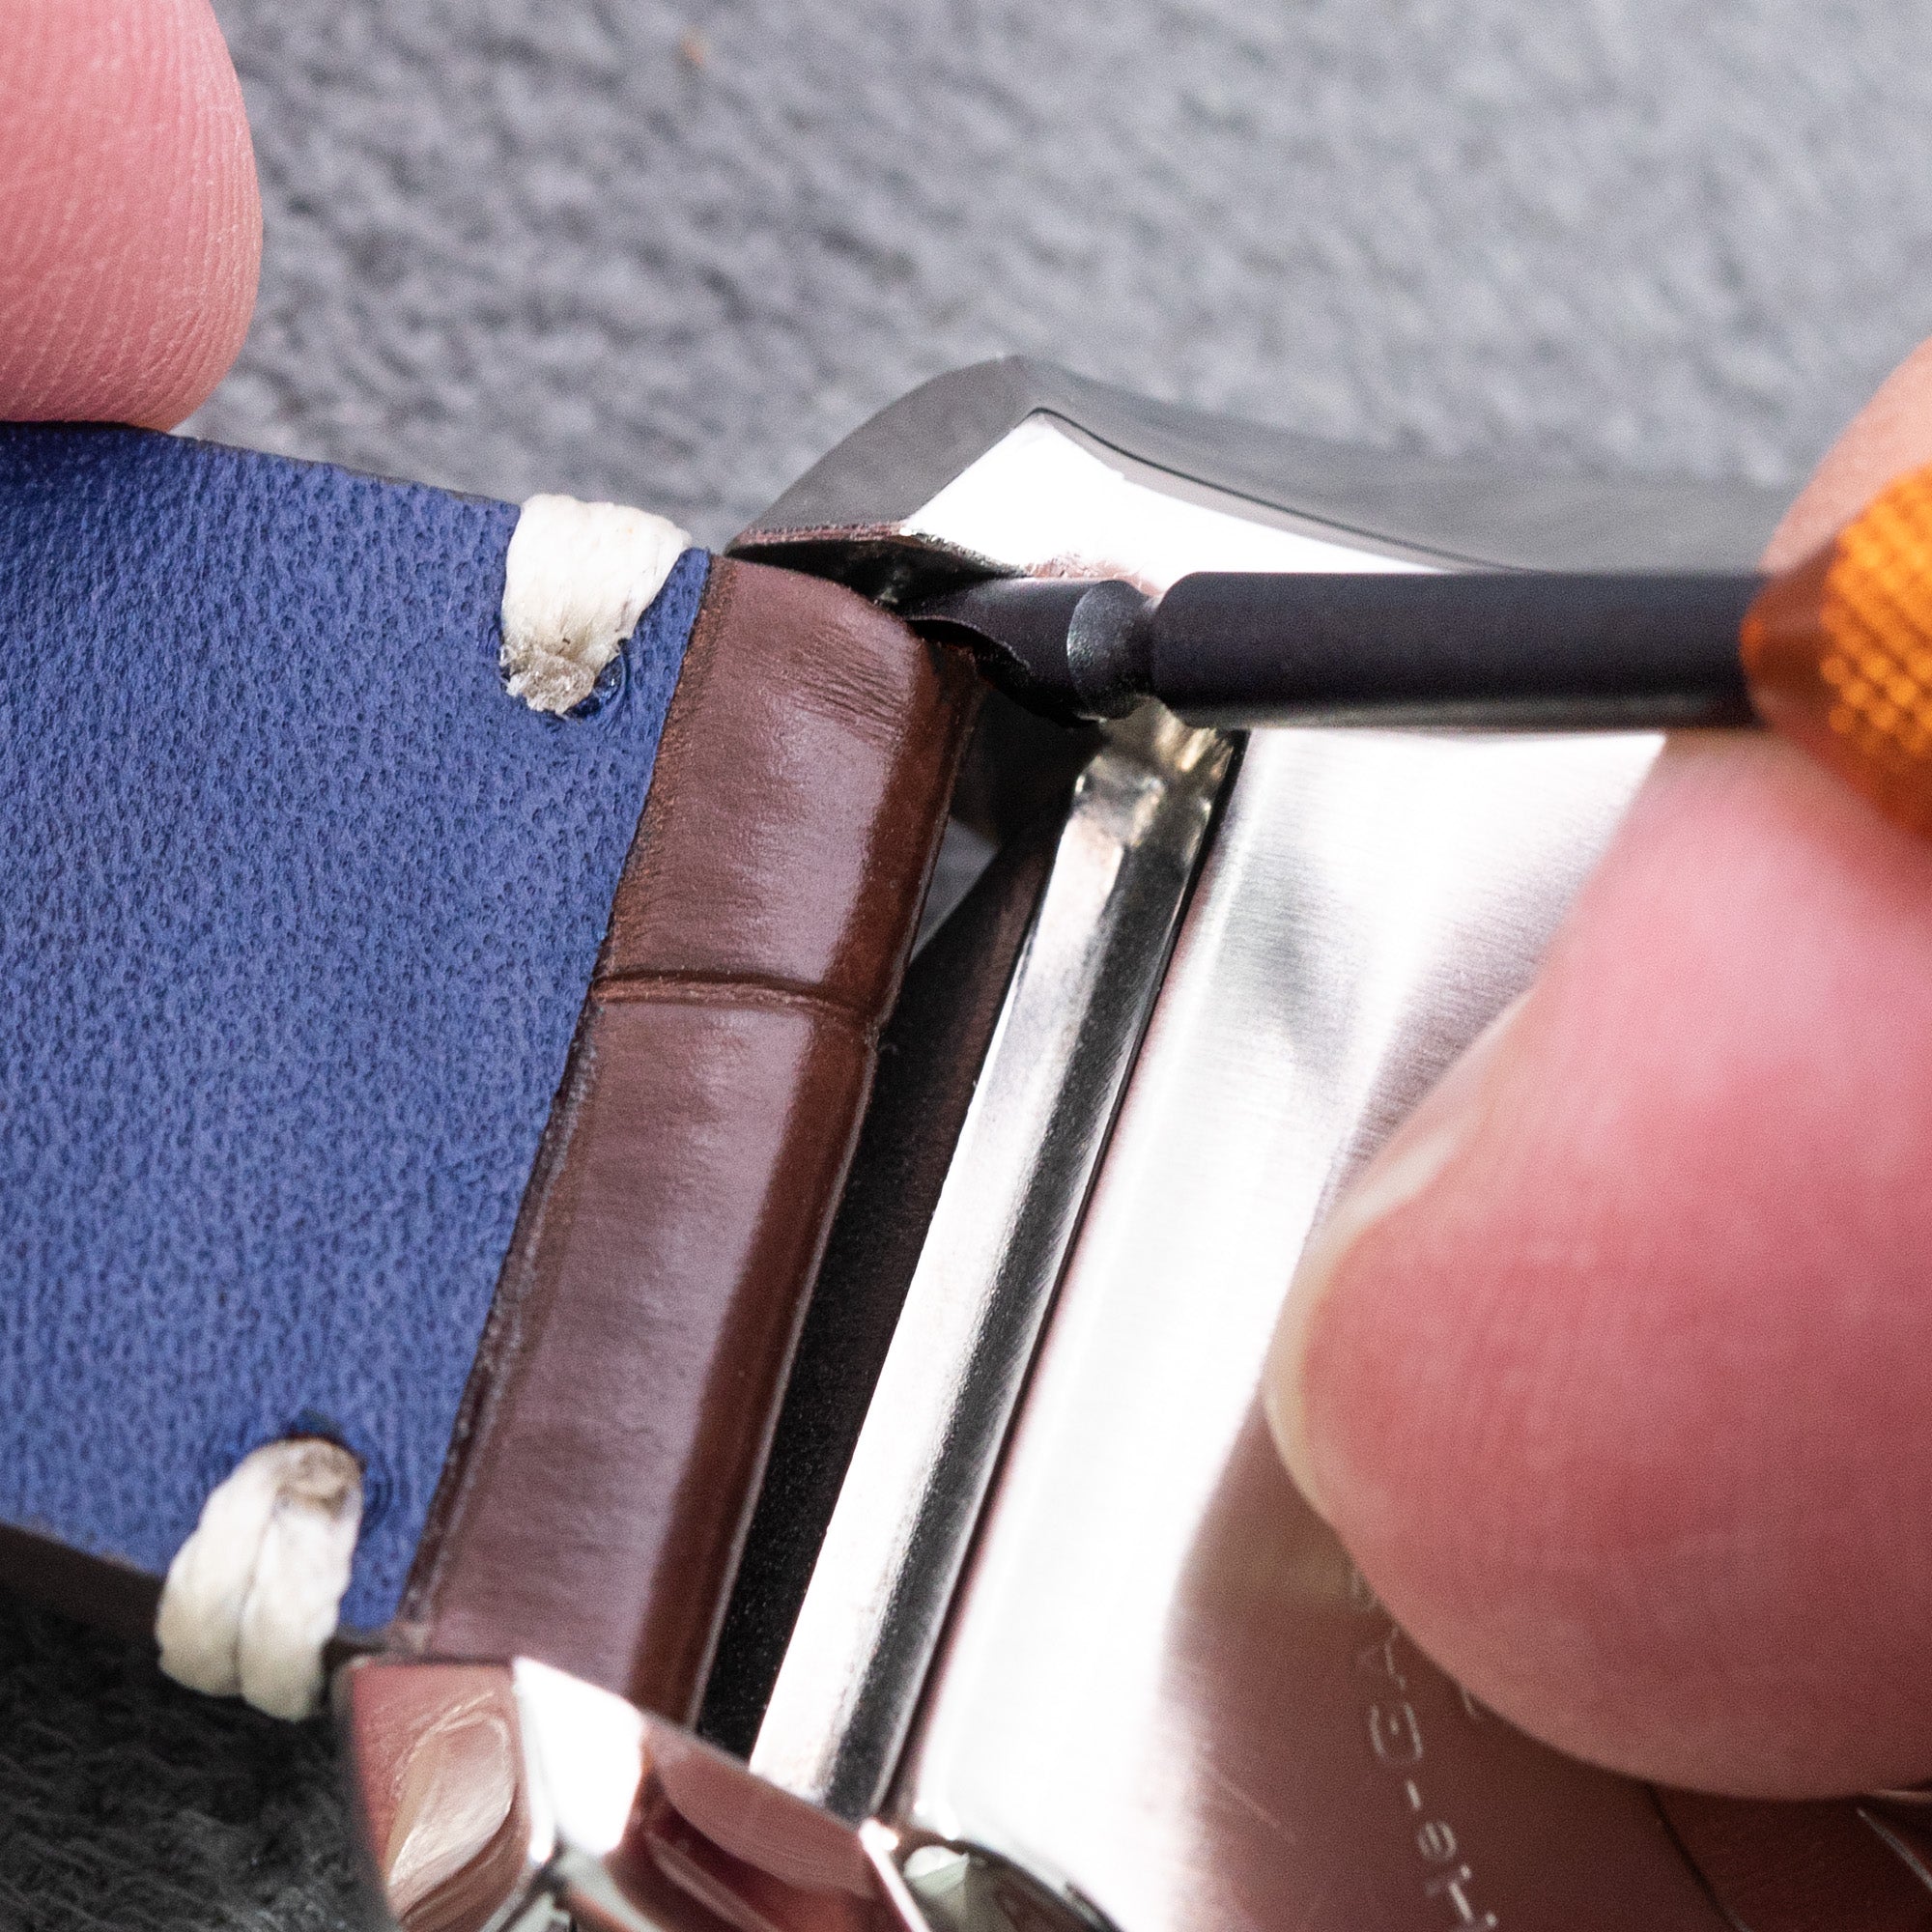 Watch Band tool - Removing spring bars on leather watch bands 